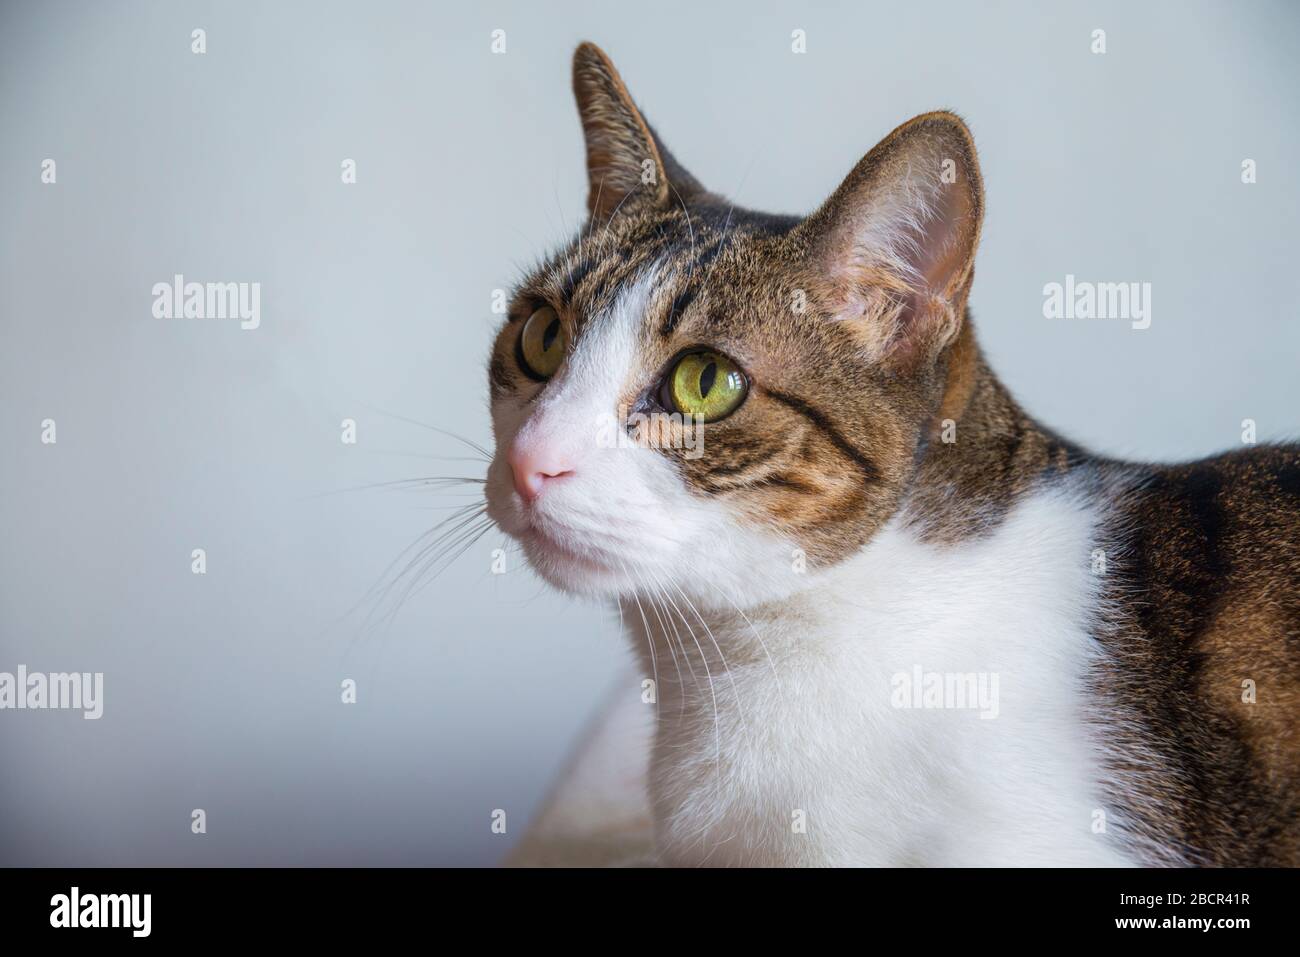 Tabby and white cat. Profile portrait. Stock Photo